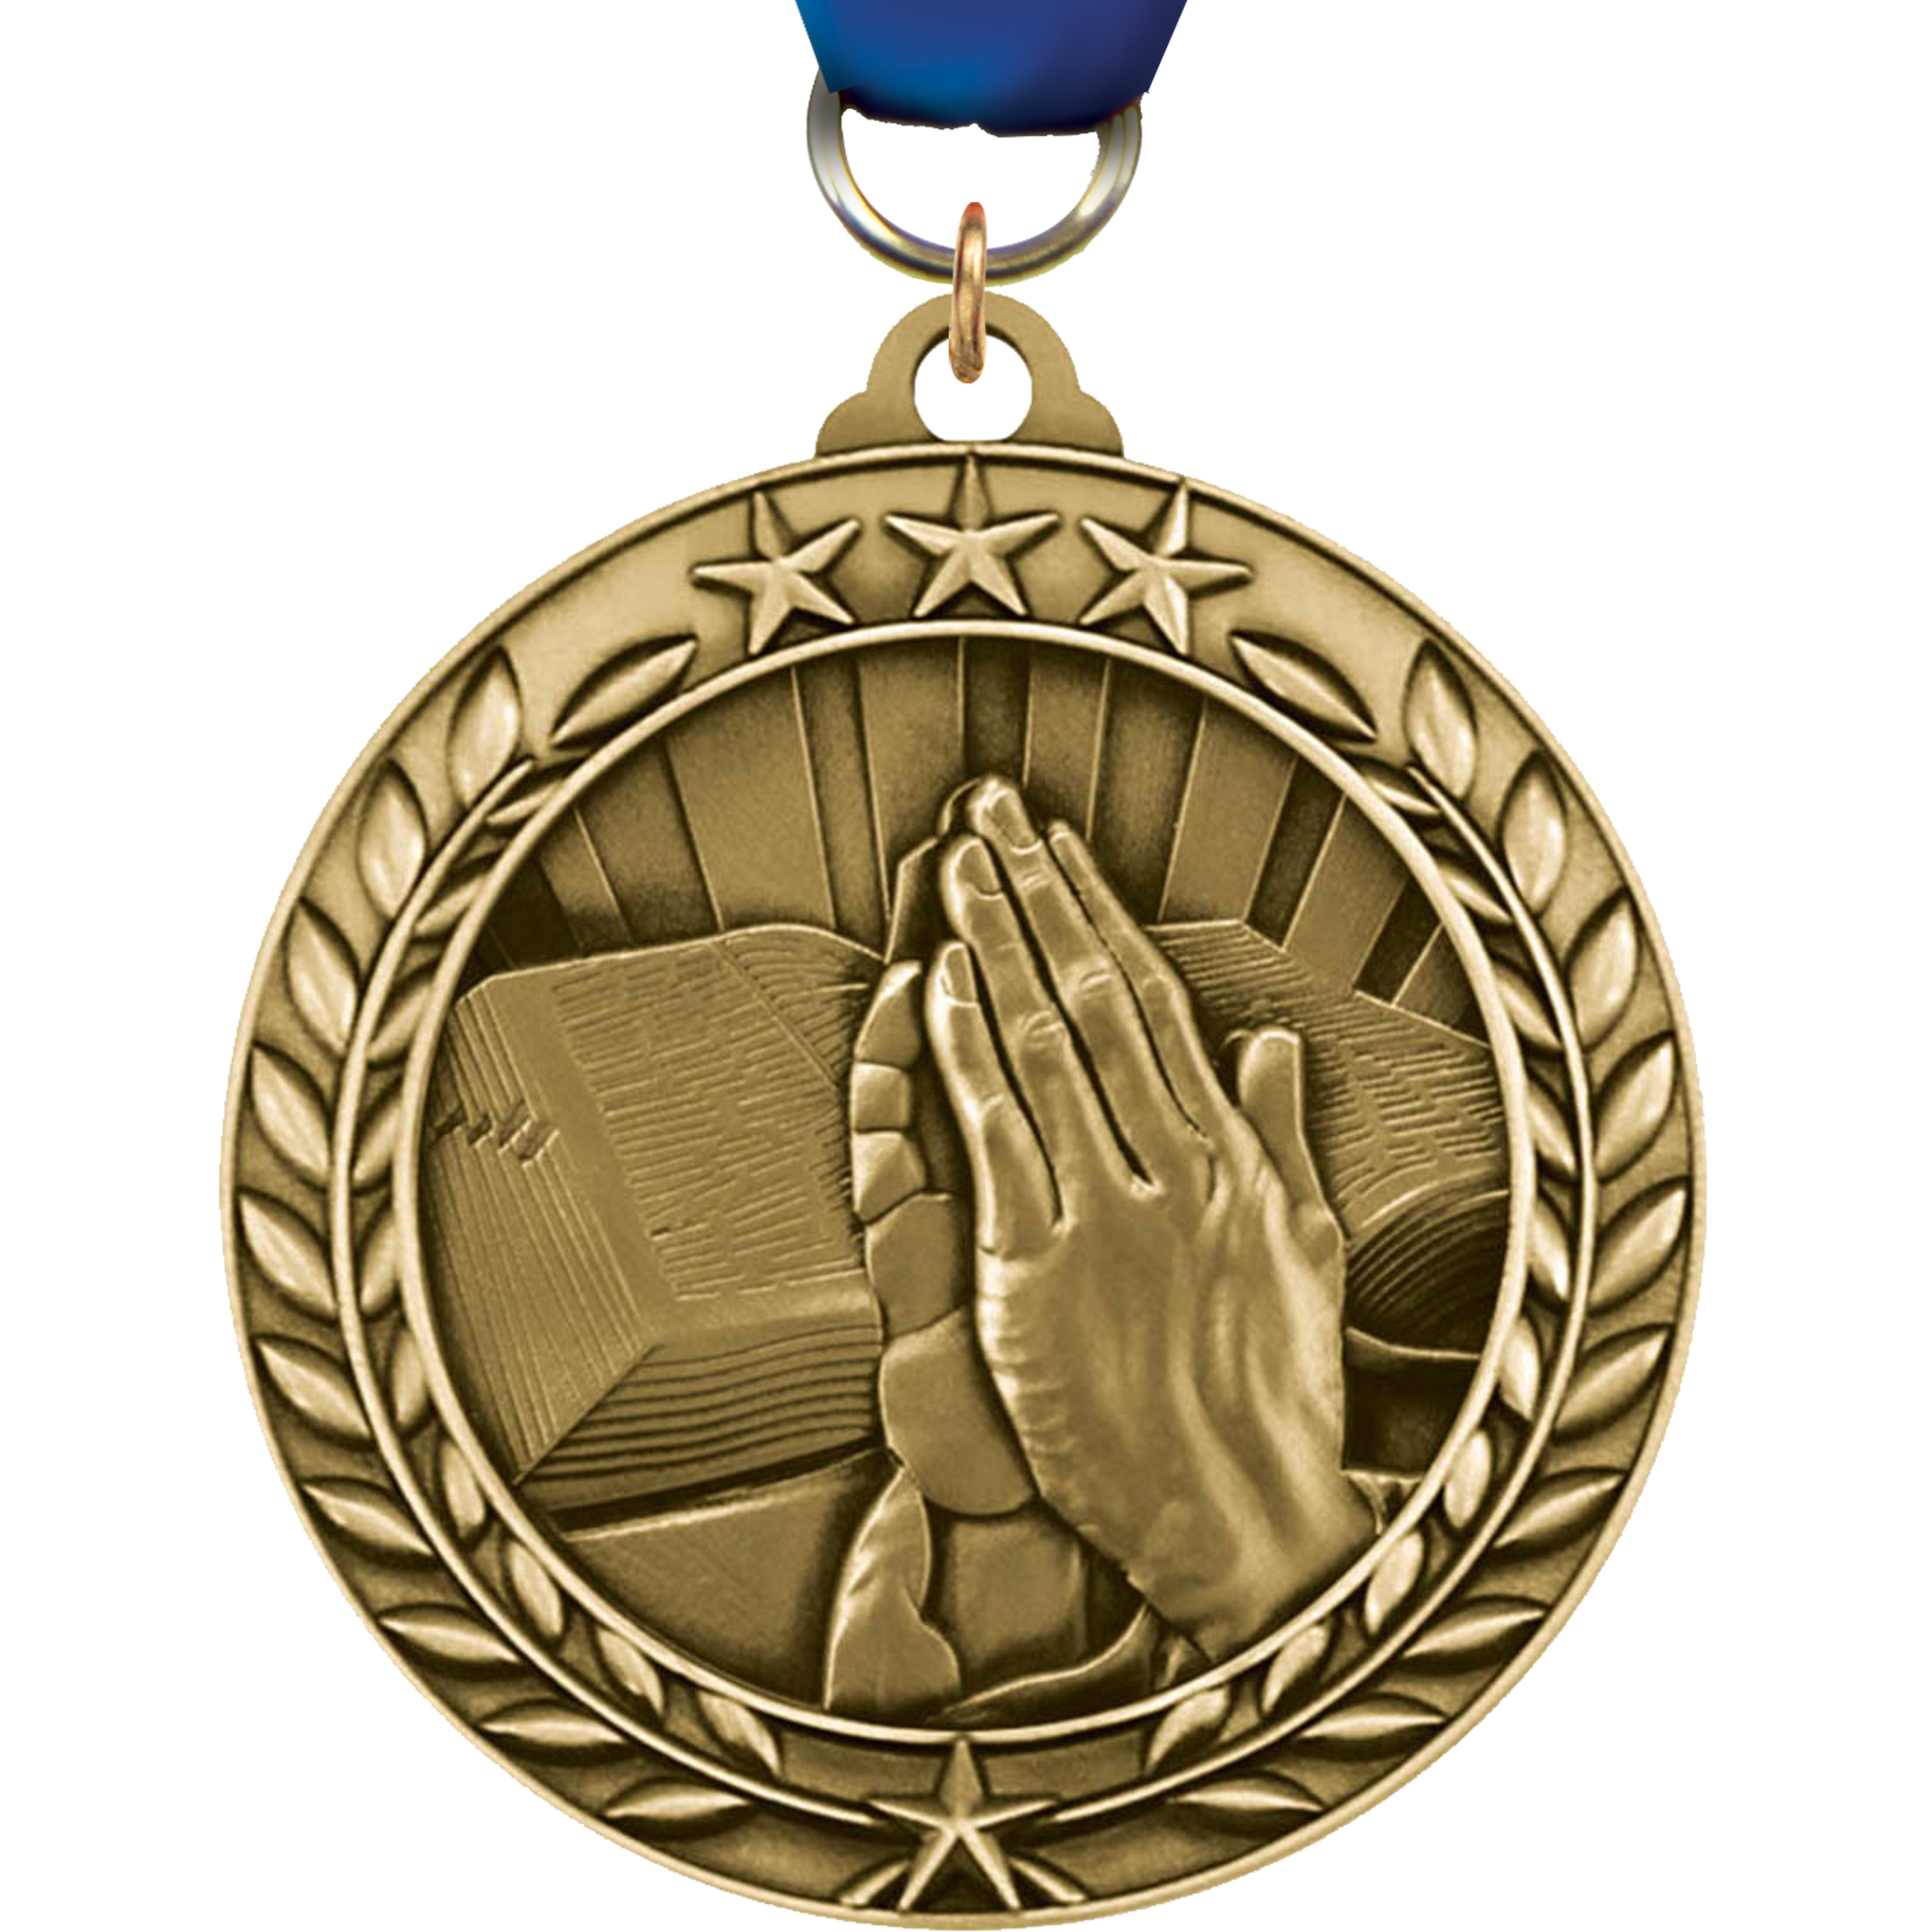 Praying Hands 1.75 inch Dimensional Medal